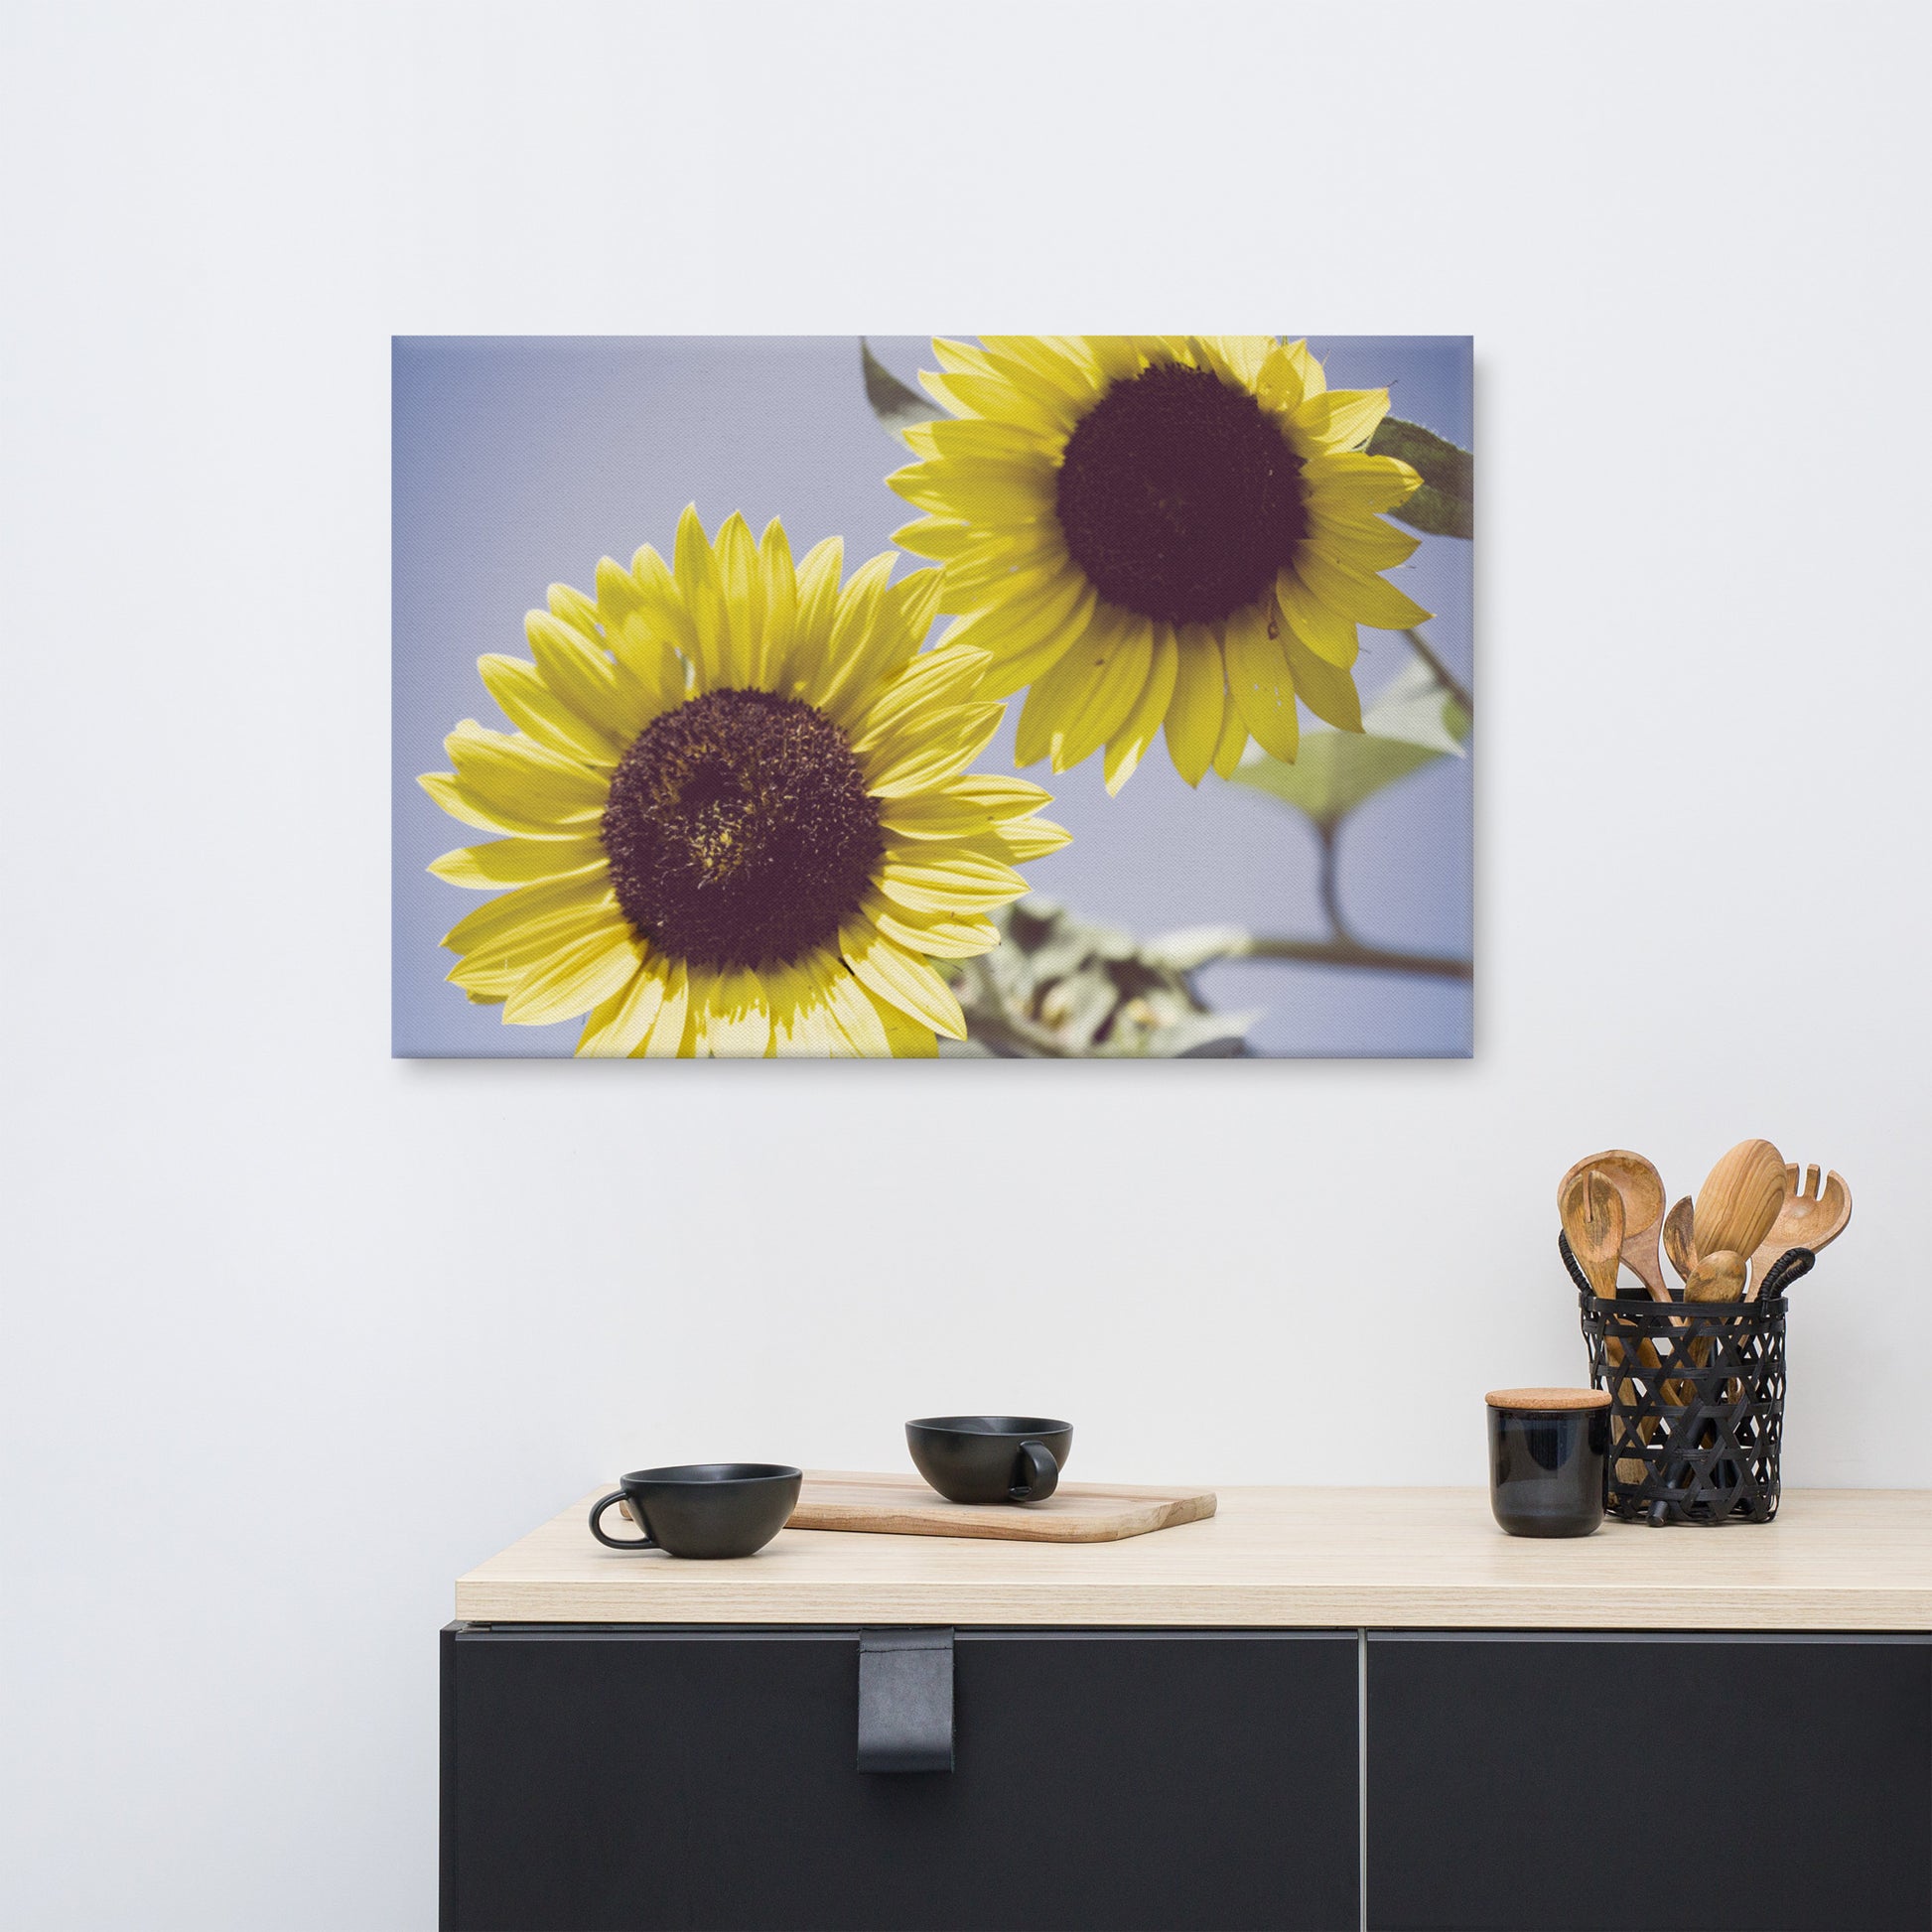 Canvas Art With Flowers: Aged Sunflowers Against Sky - Rustic / Minimal Botanical / Floral / Flora / Flowers Nature Photograph Canvas Wall Art Print - Artwork